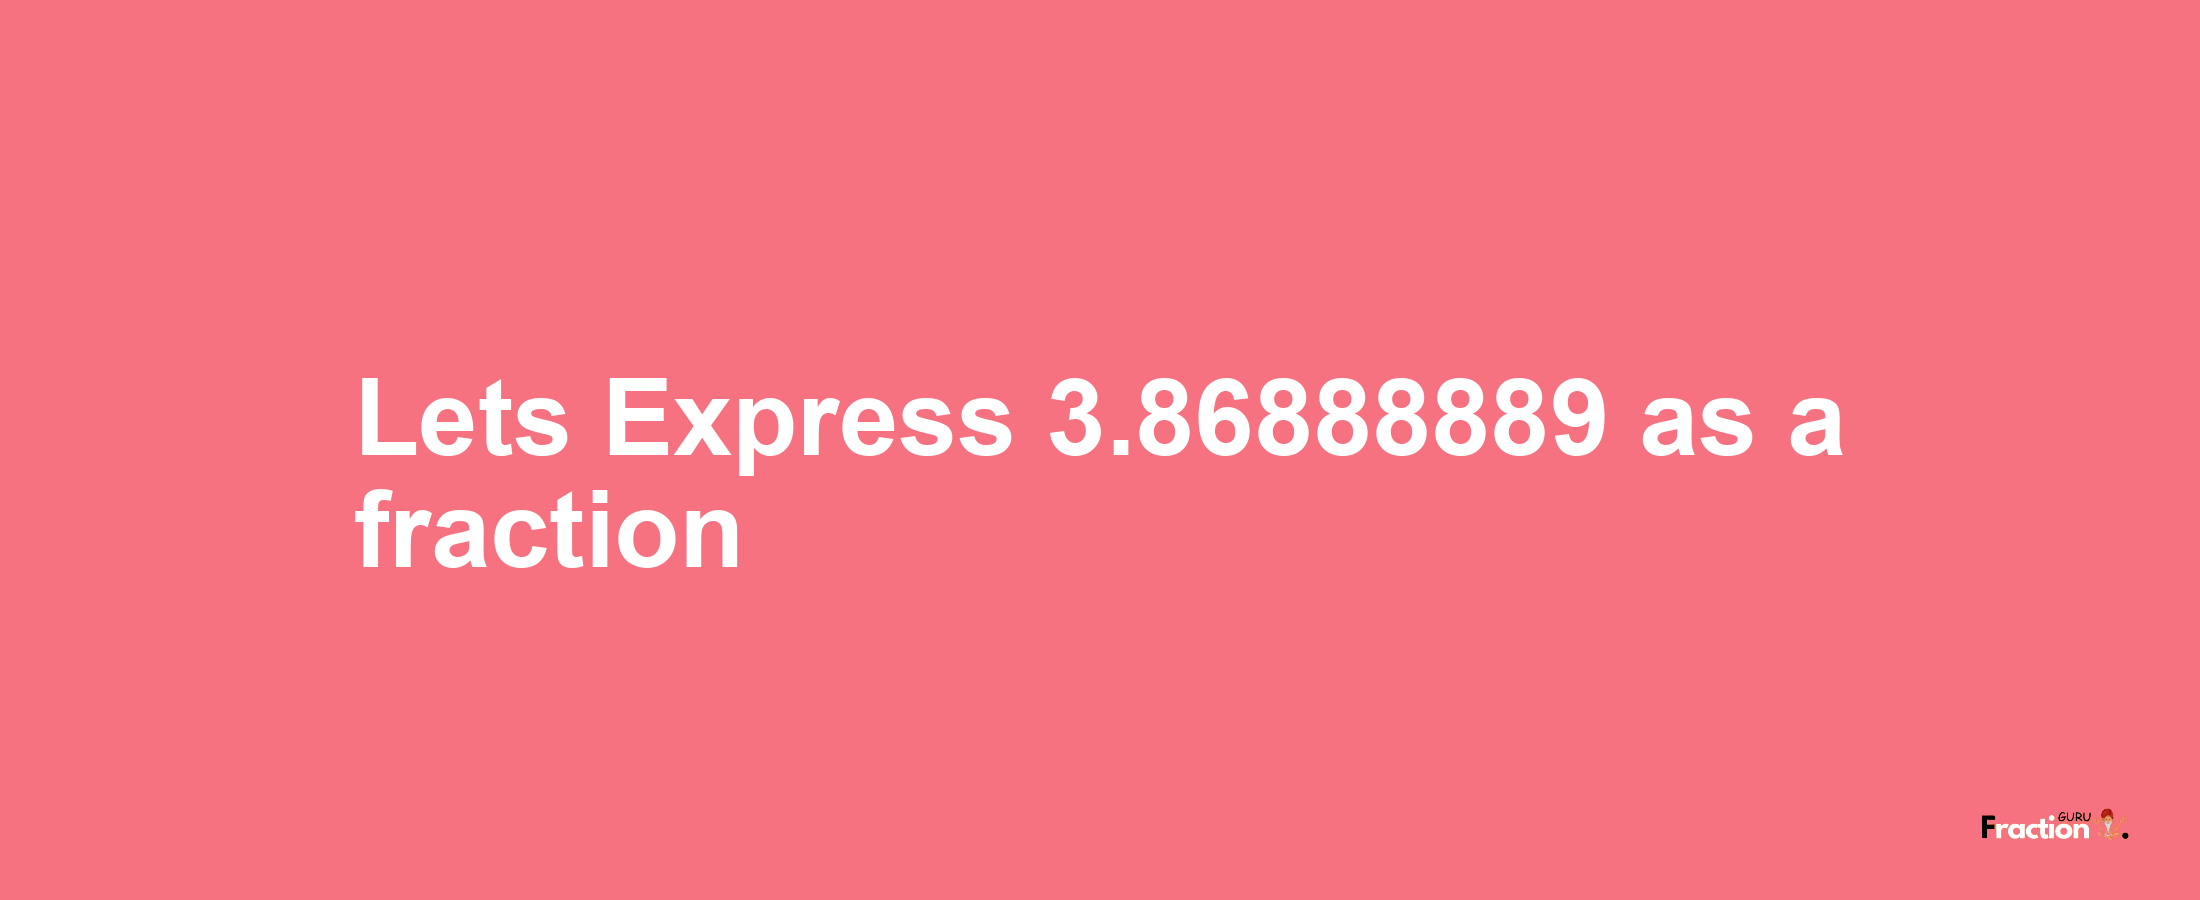 Lets Express 3.86888889 as afraction